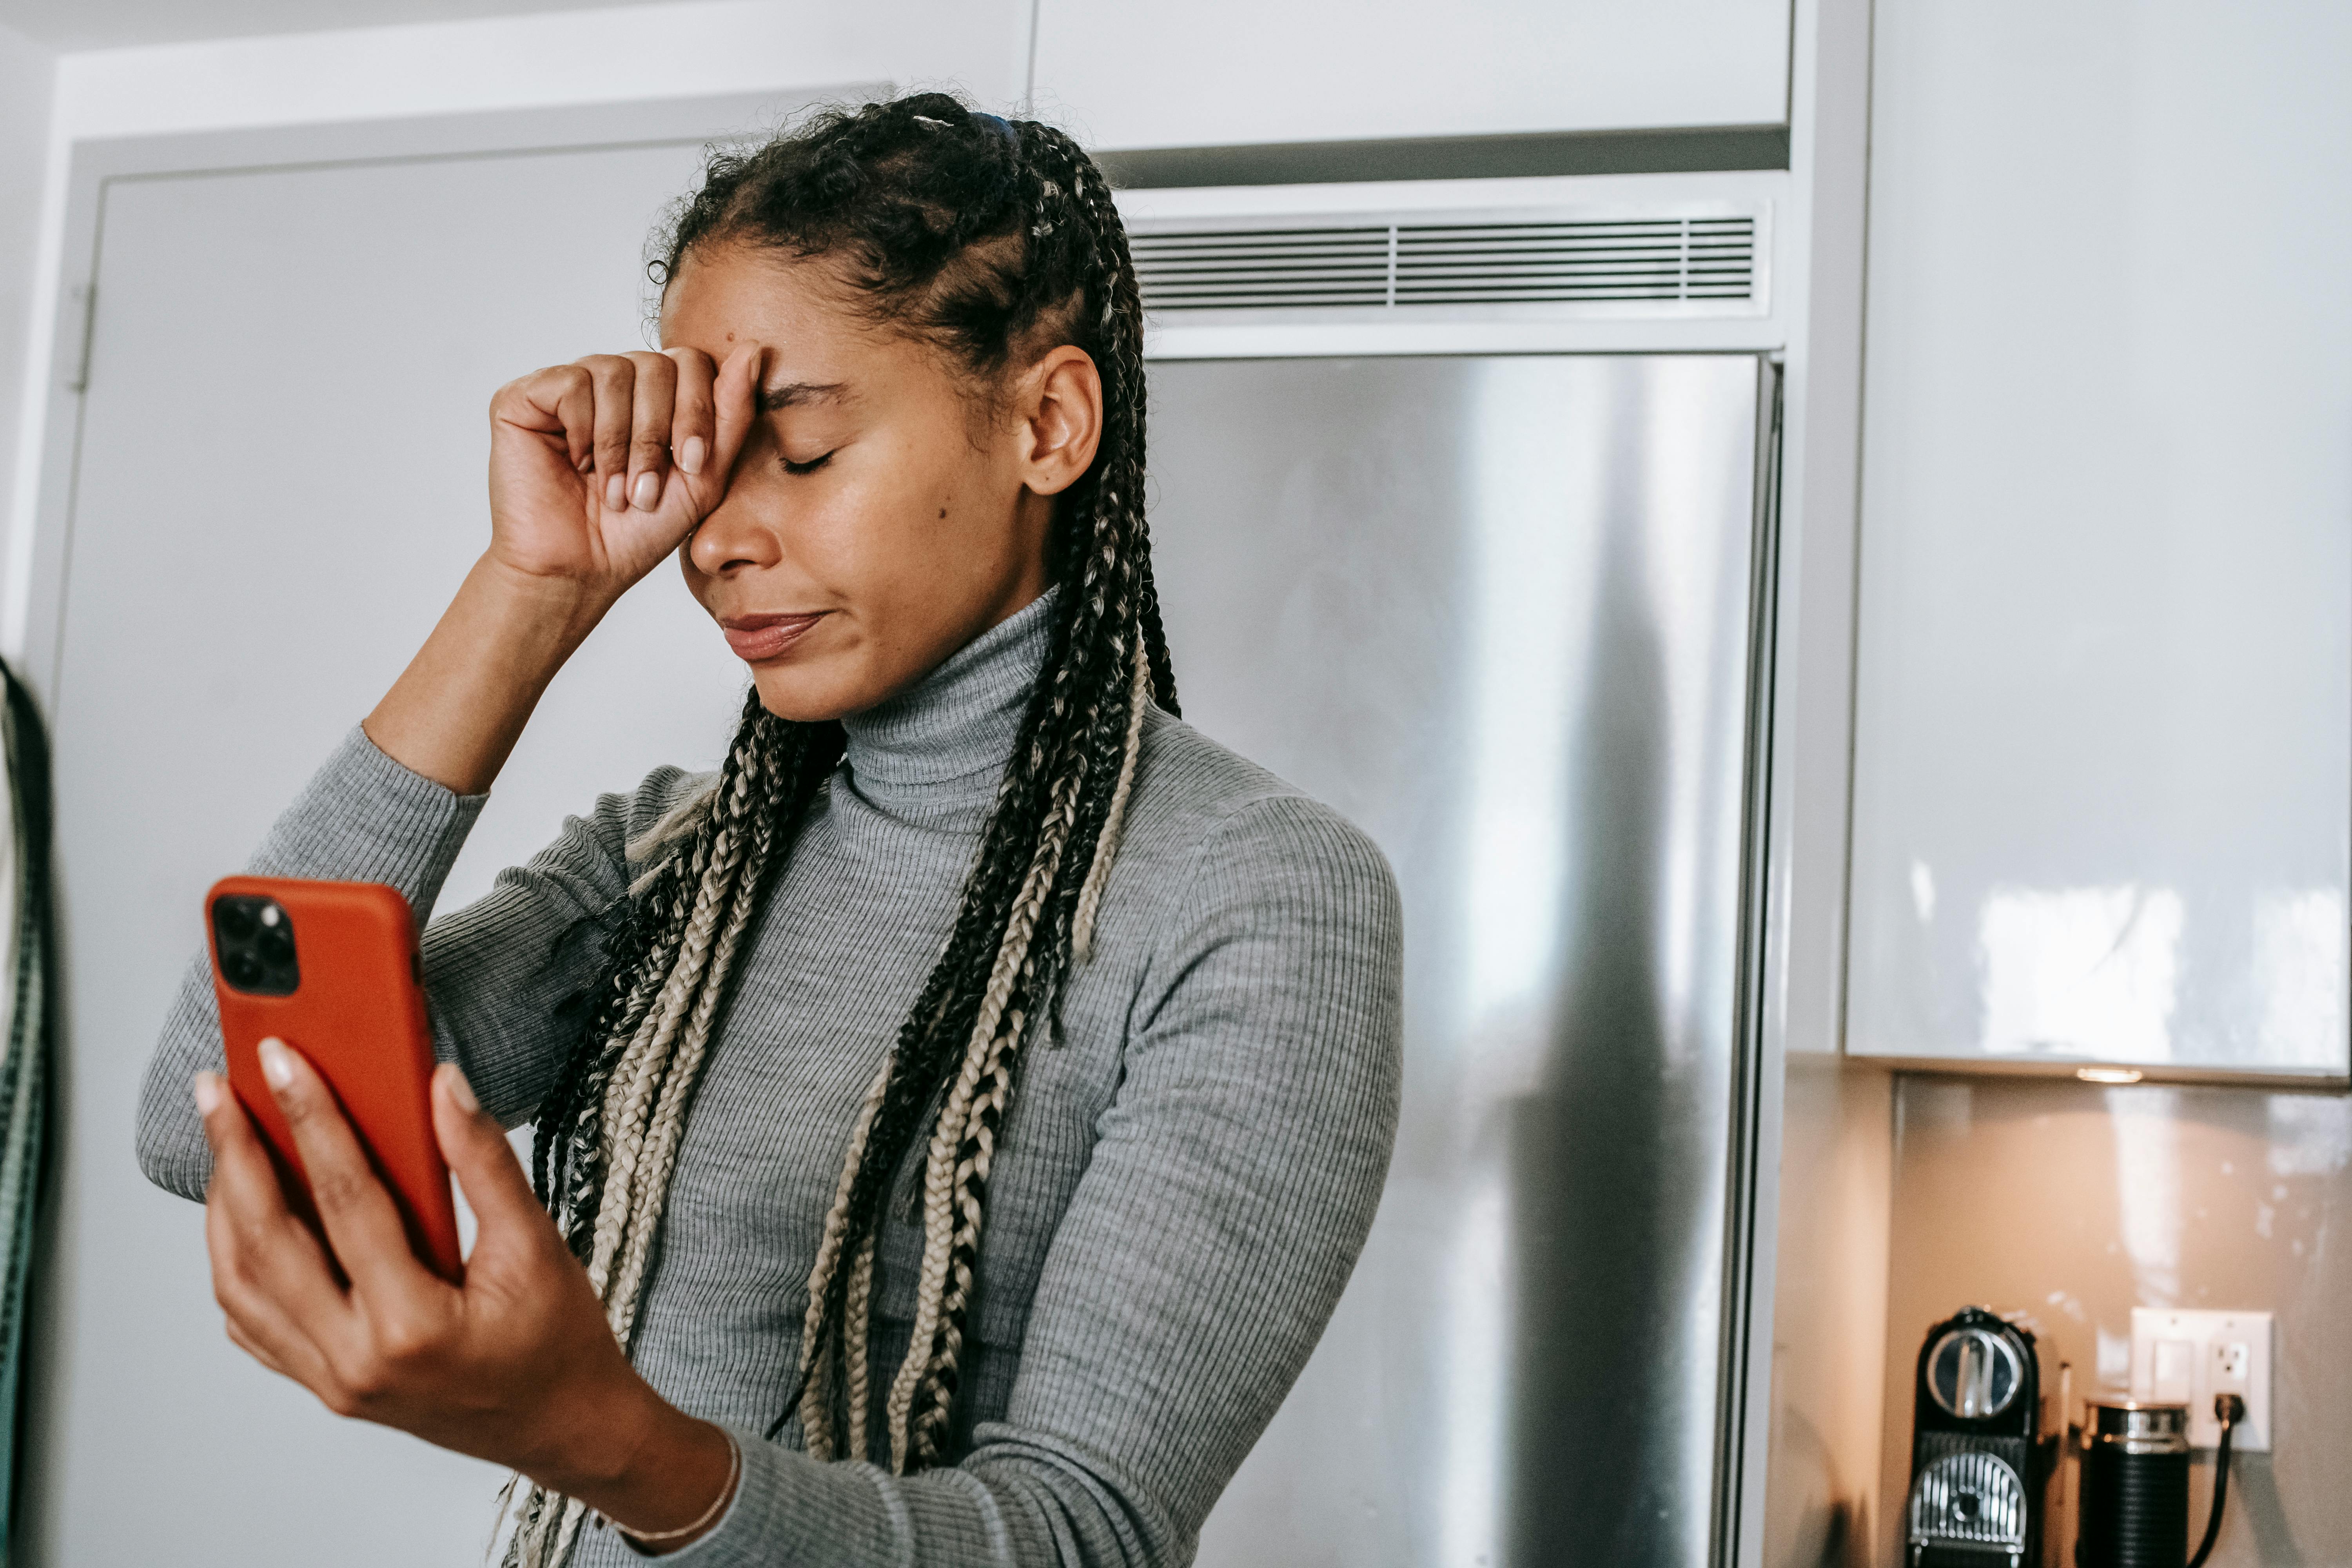 A woman reading an upsetting text | Source: Pexels